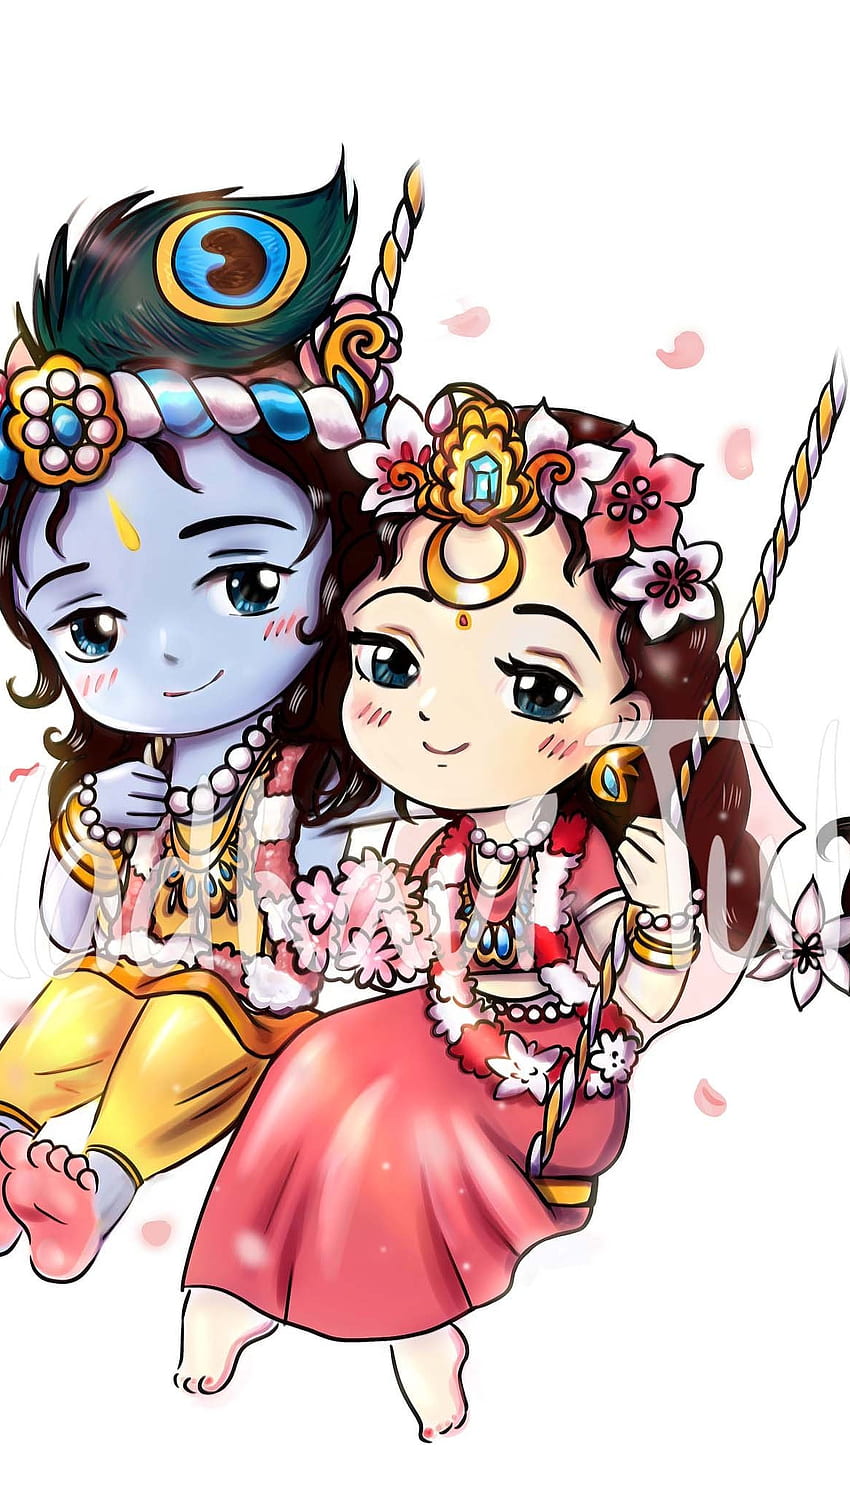 “Cute Radha Krishna Images: A Stunning Collection of Over 999 Full 4K Pictures”